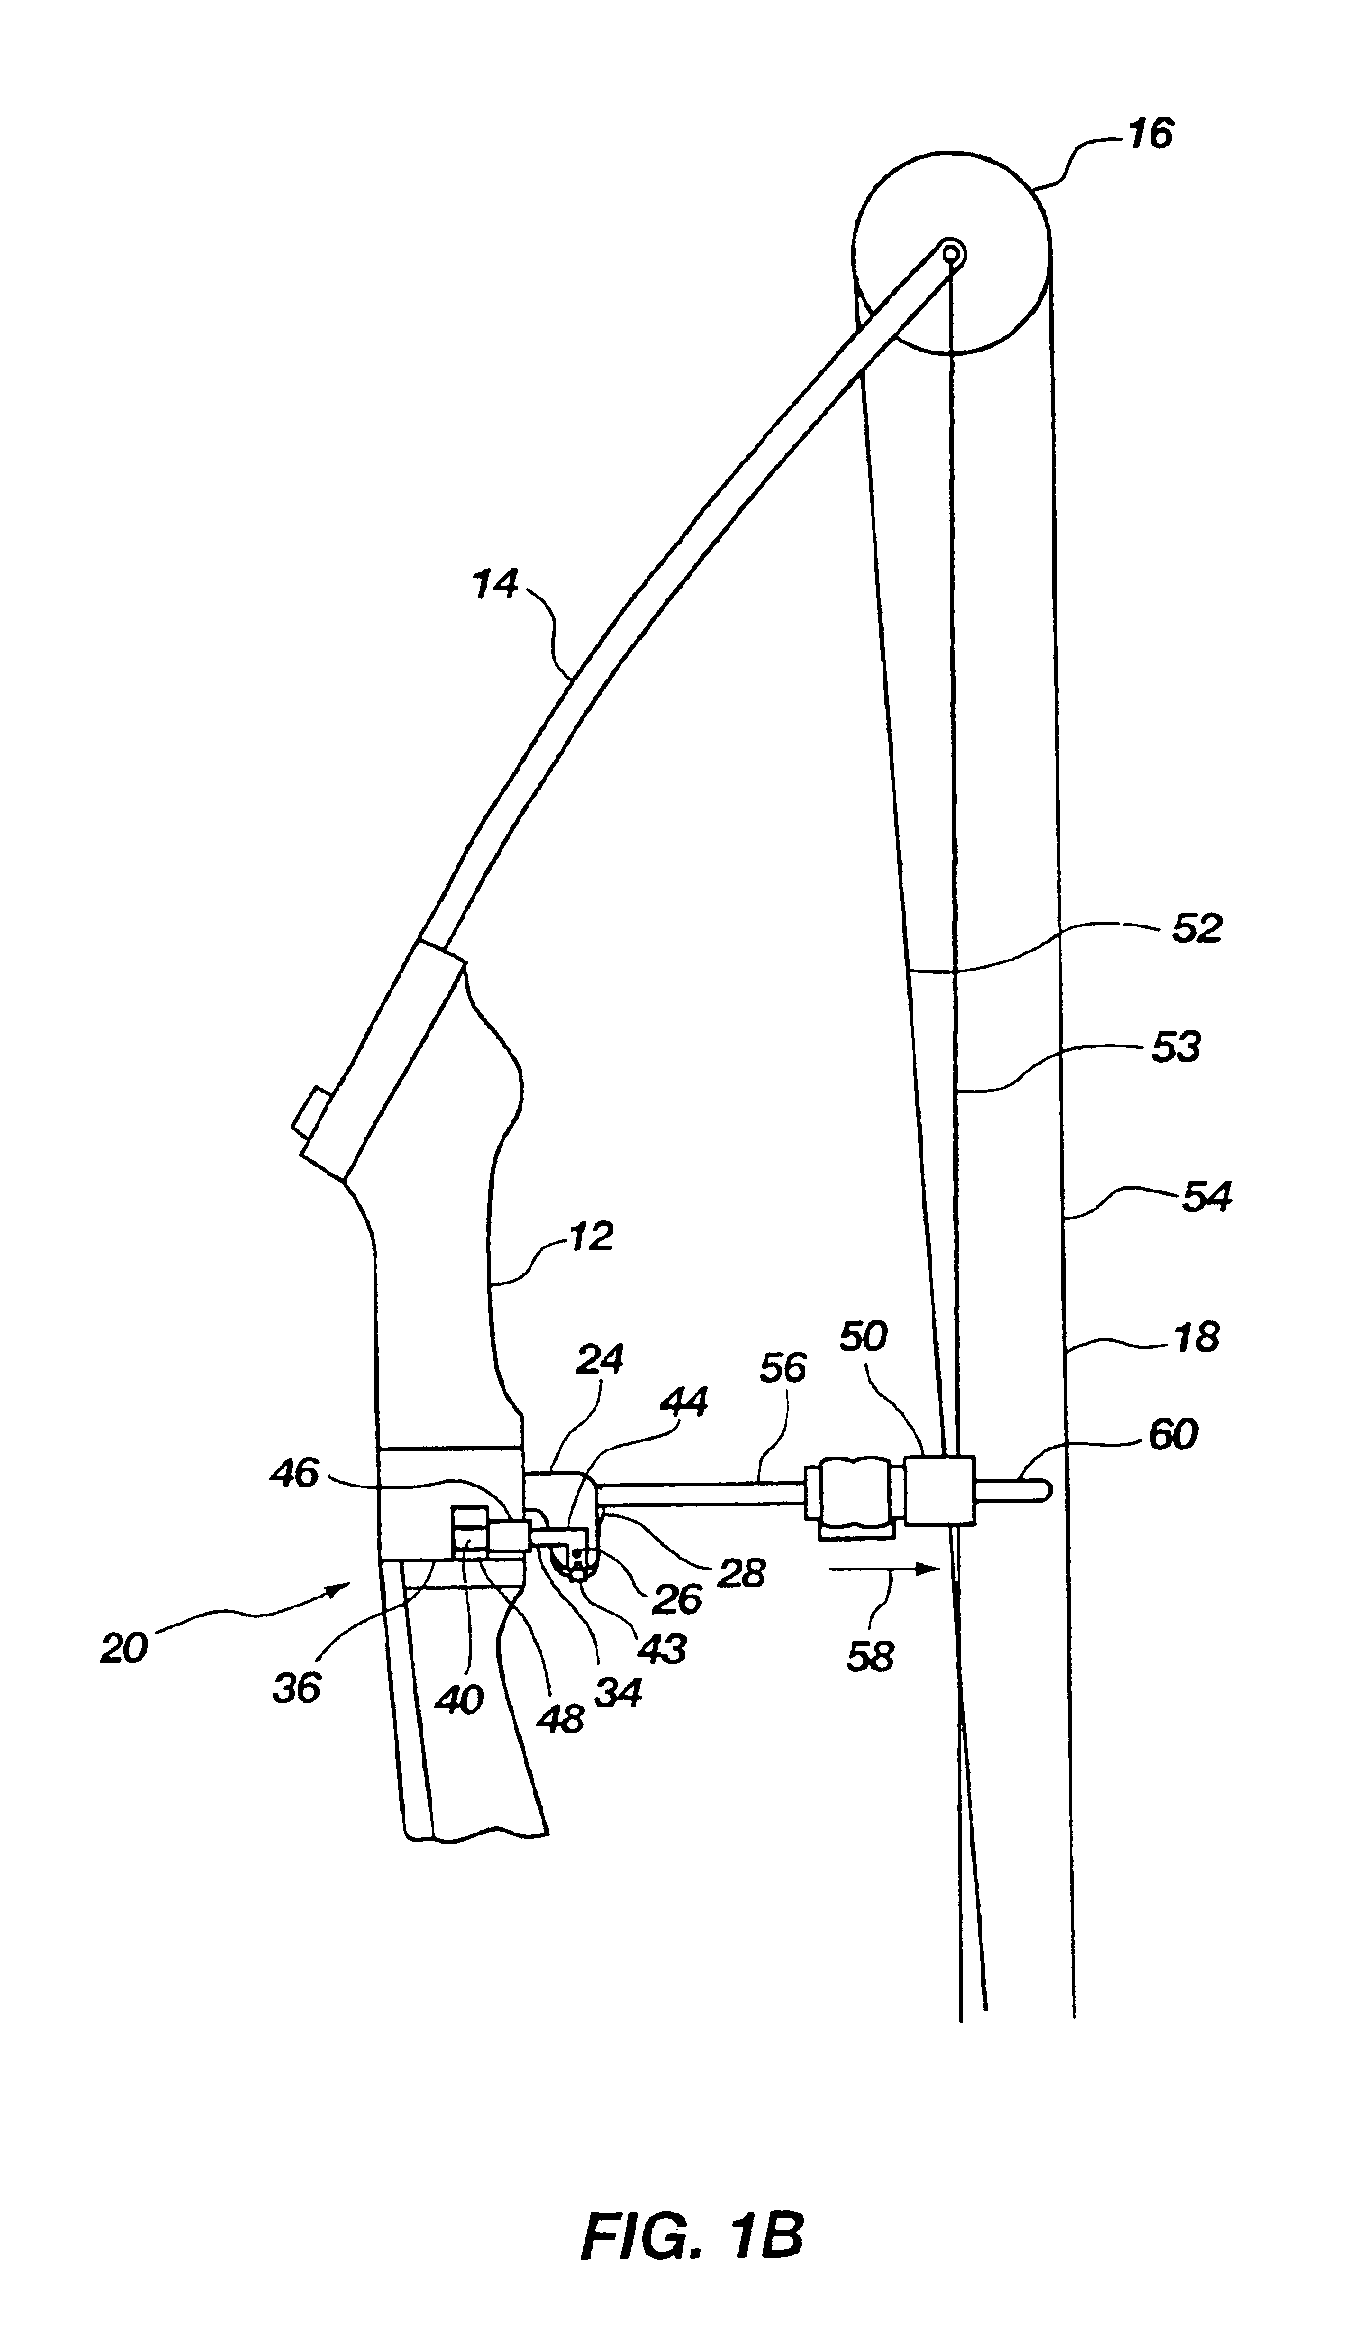 Shaft clamping arrow rest